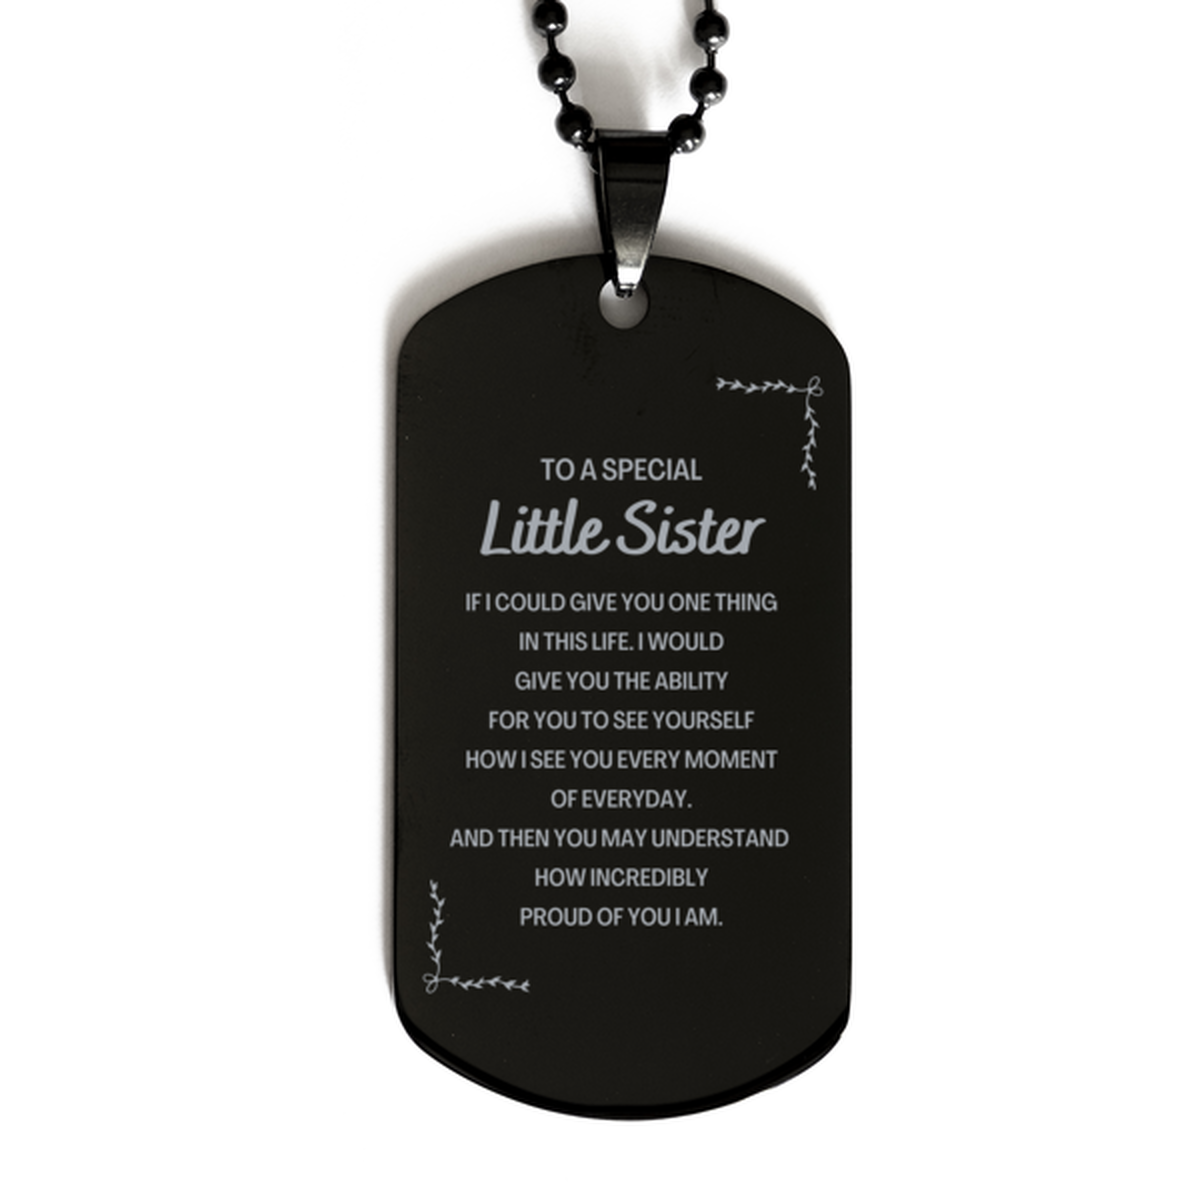 To My Little Sister Black Dog Tag, Gifts For Little Sister Engraved, Inspirational Gifts for Christmas Birthday, Epic Gifts for Little Sister To A Special Little Sister how incredibly proud of you I am